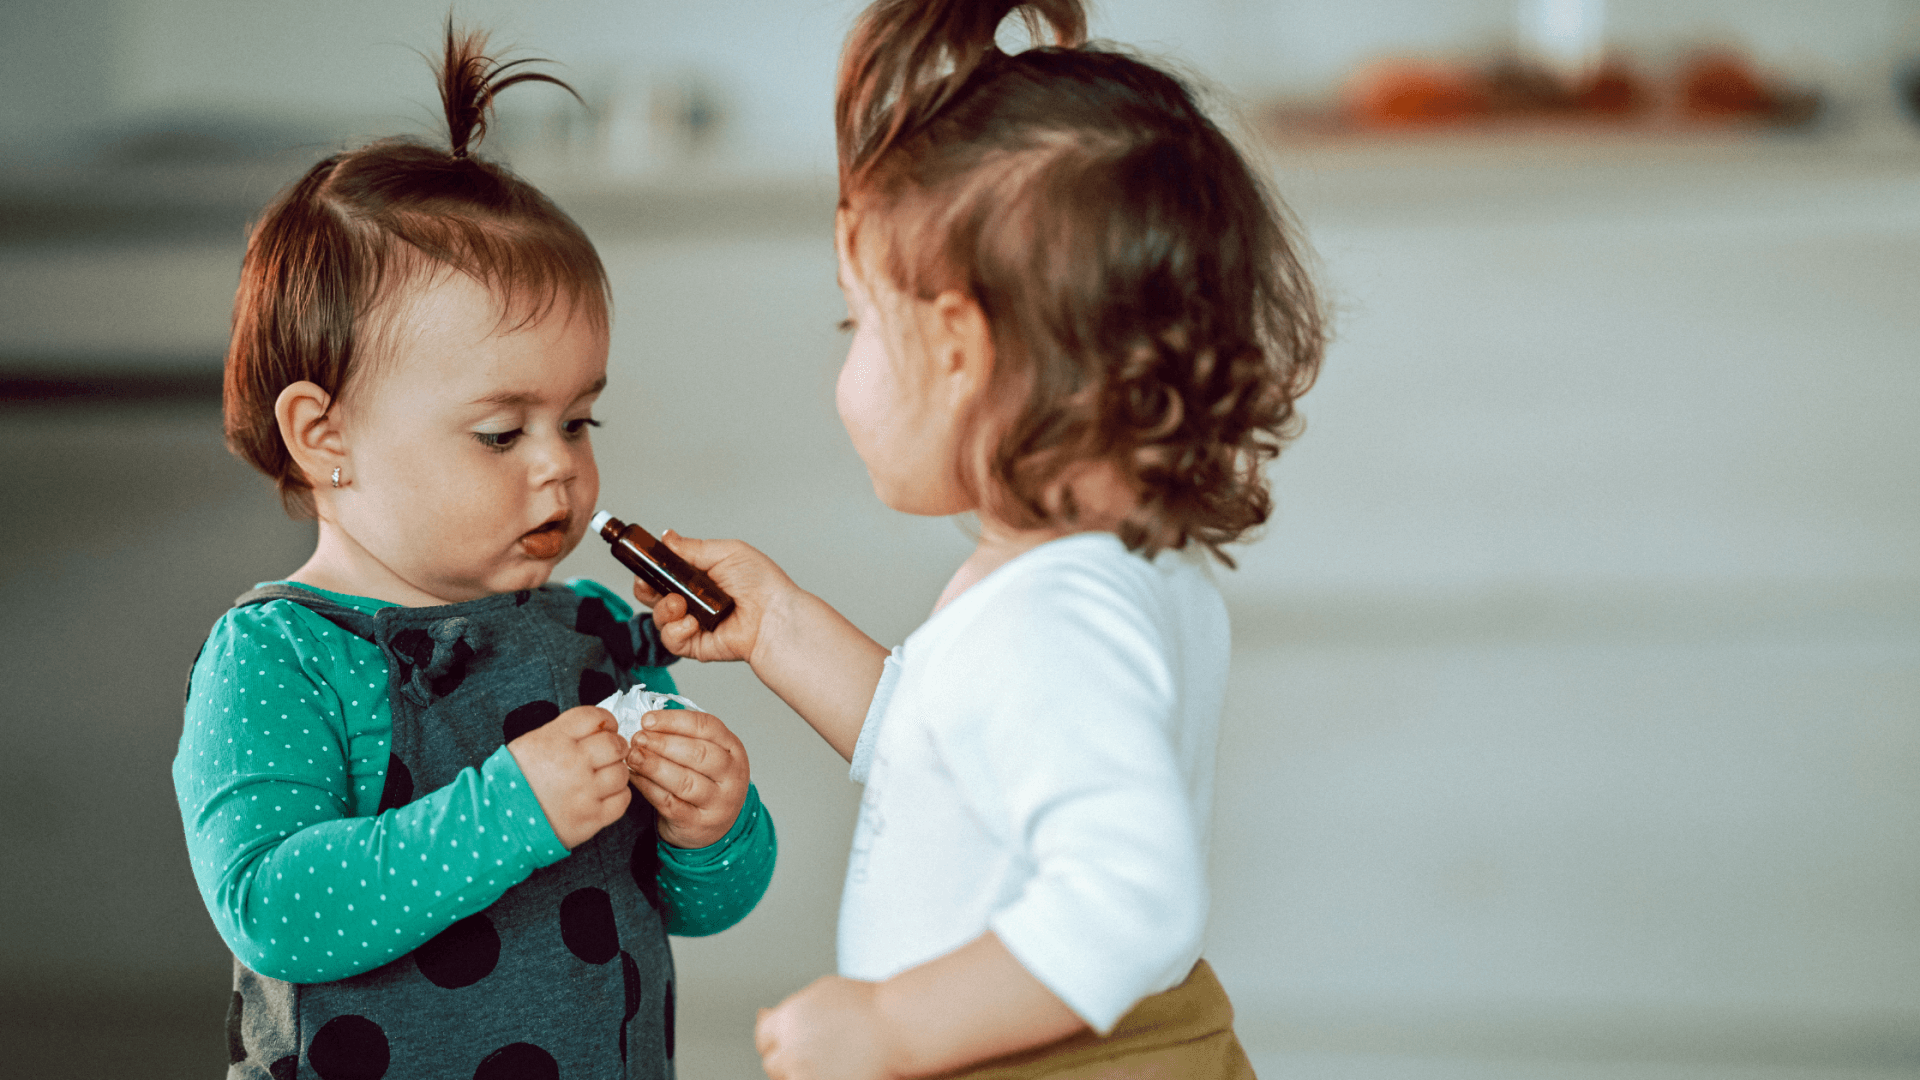 Kids and Essential Oils